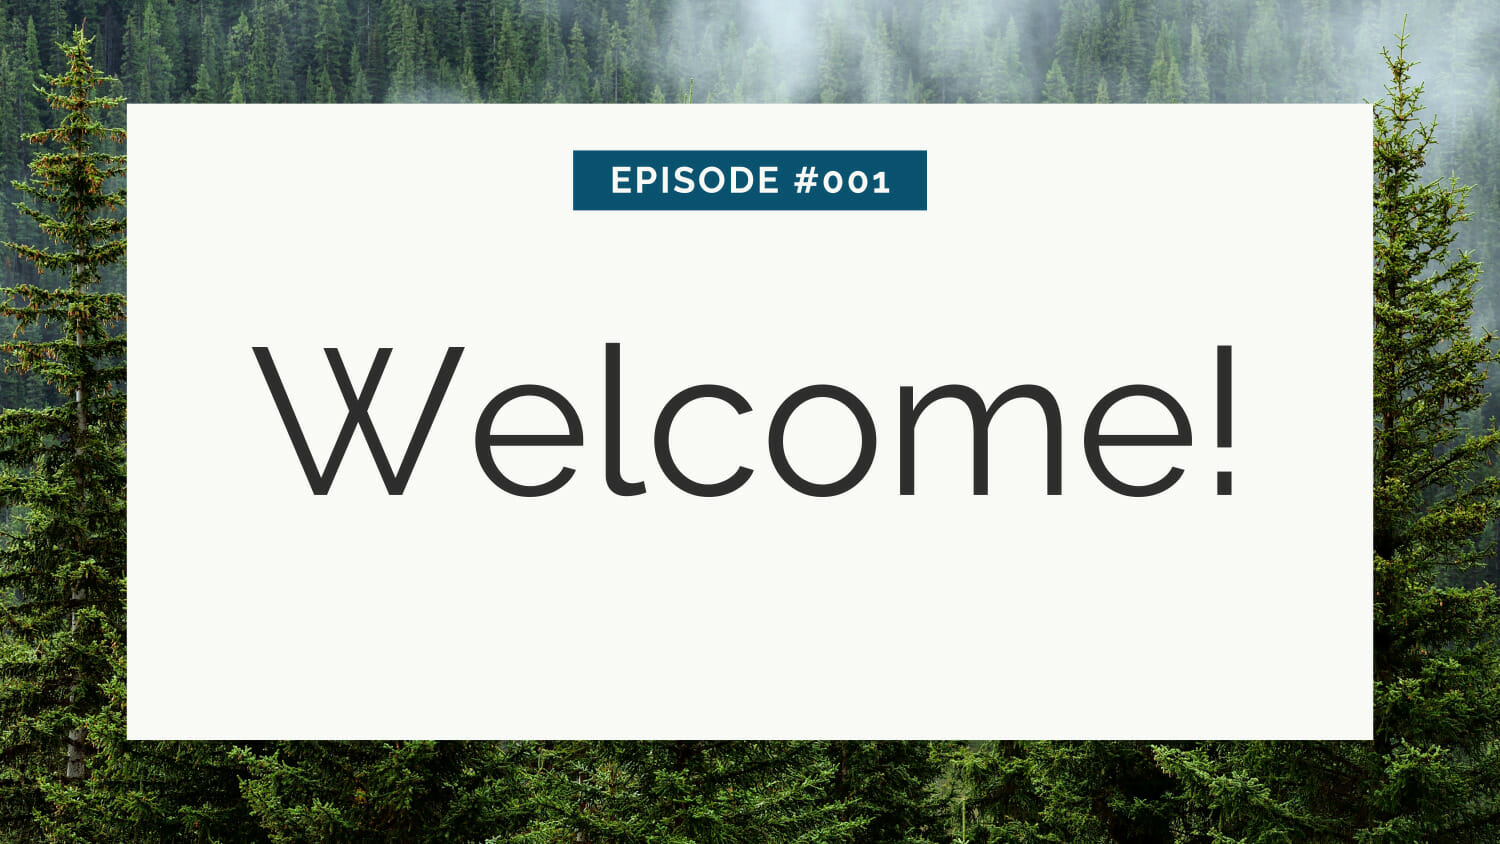 First episode welcoming title overlay on a forest background.